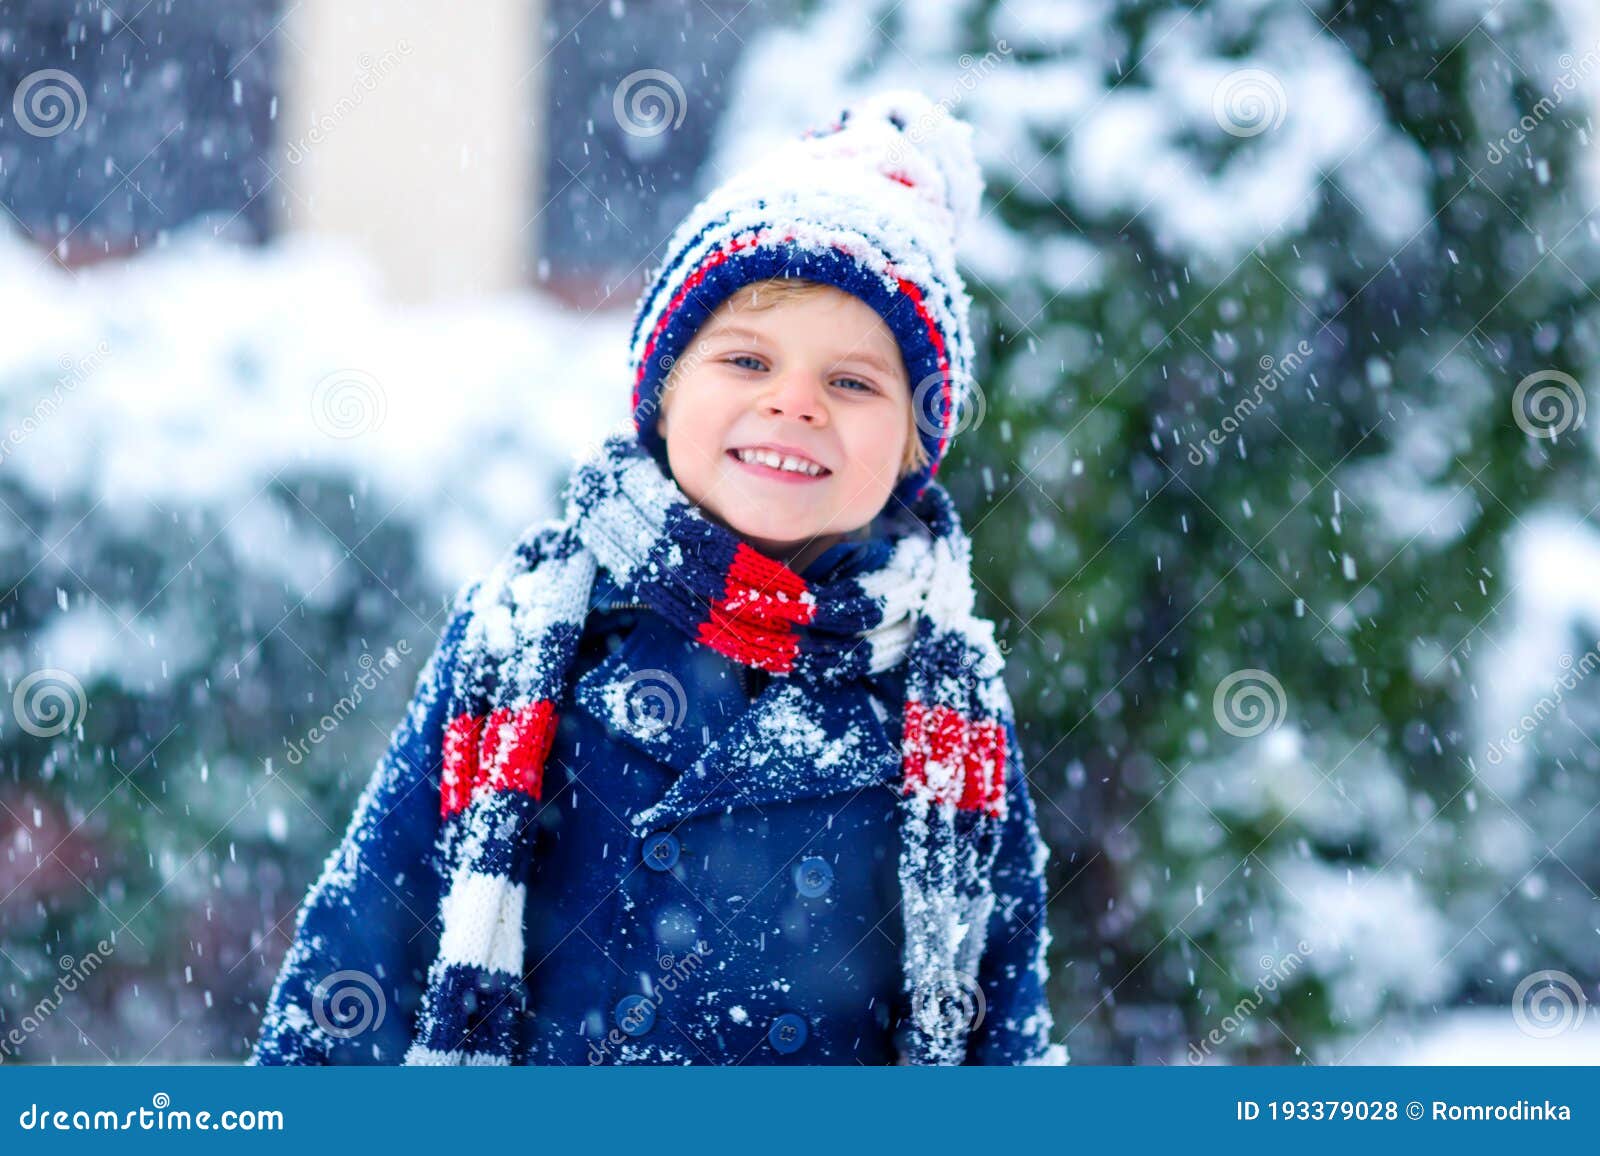 Cute Little Funny Child in Colorful Winter Fashion Clothes Having Fun and  Playing with Snow, Outdoors during Snowfall Stock Photo - Image of frost,  fashion: 193379028